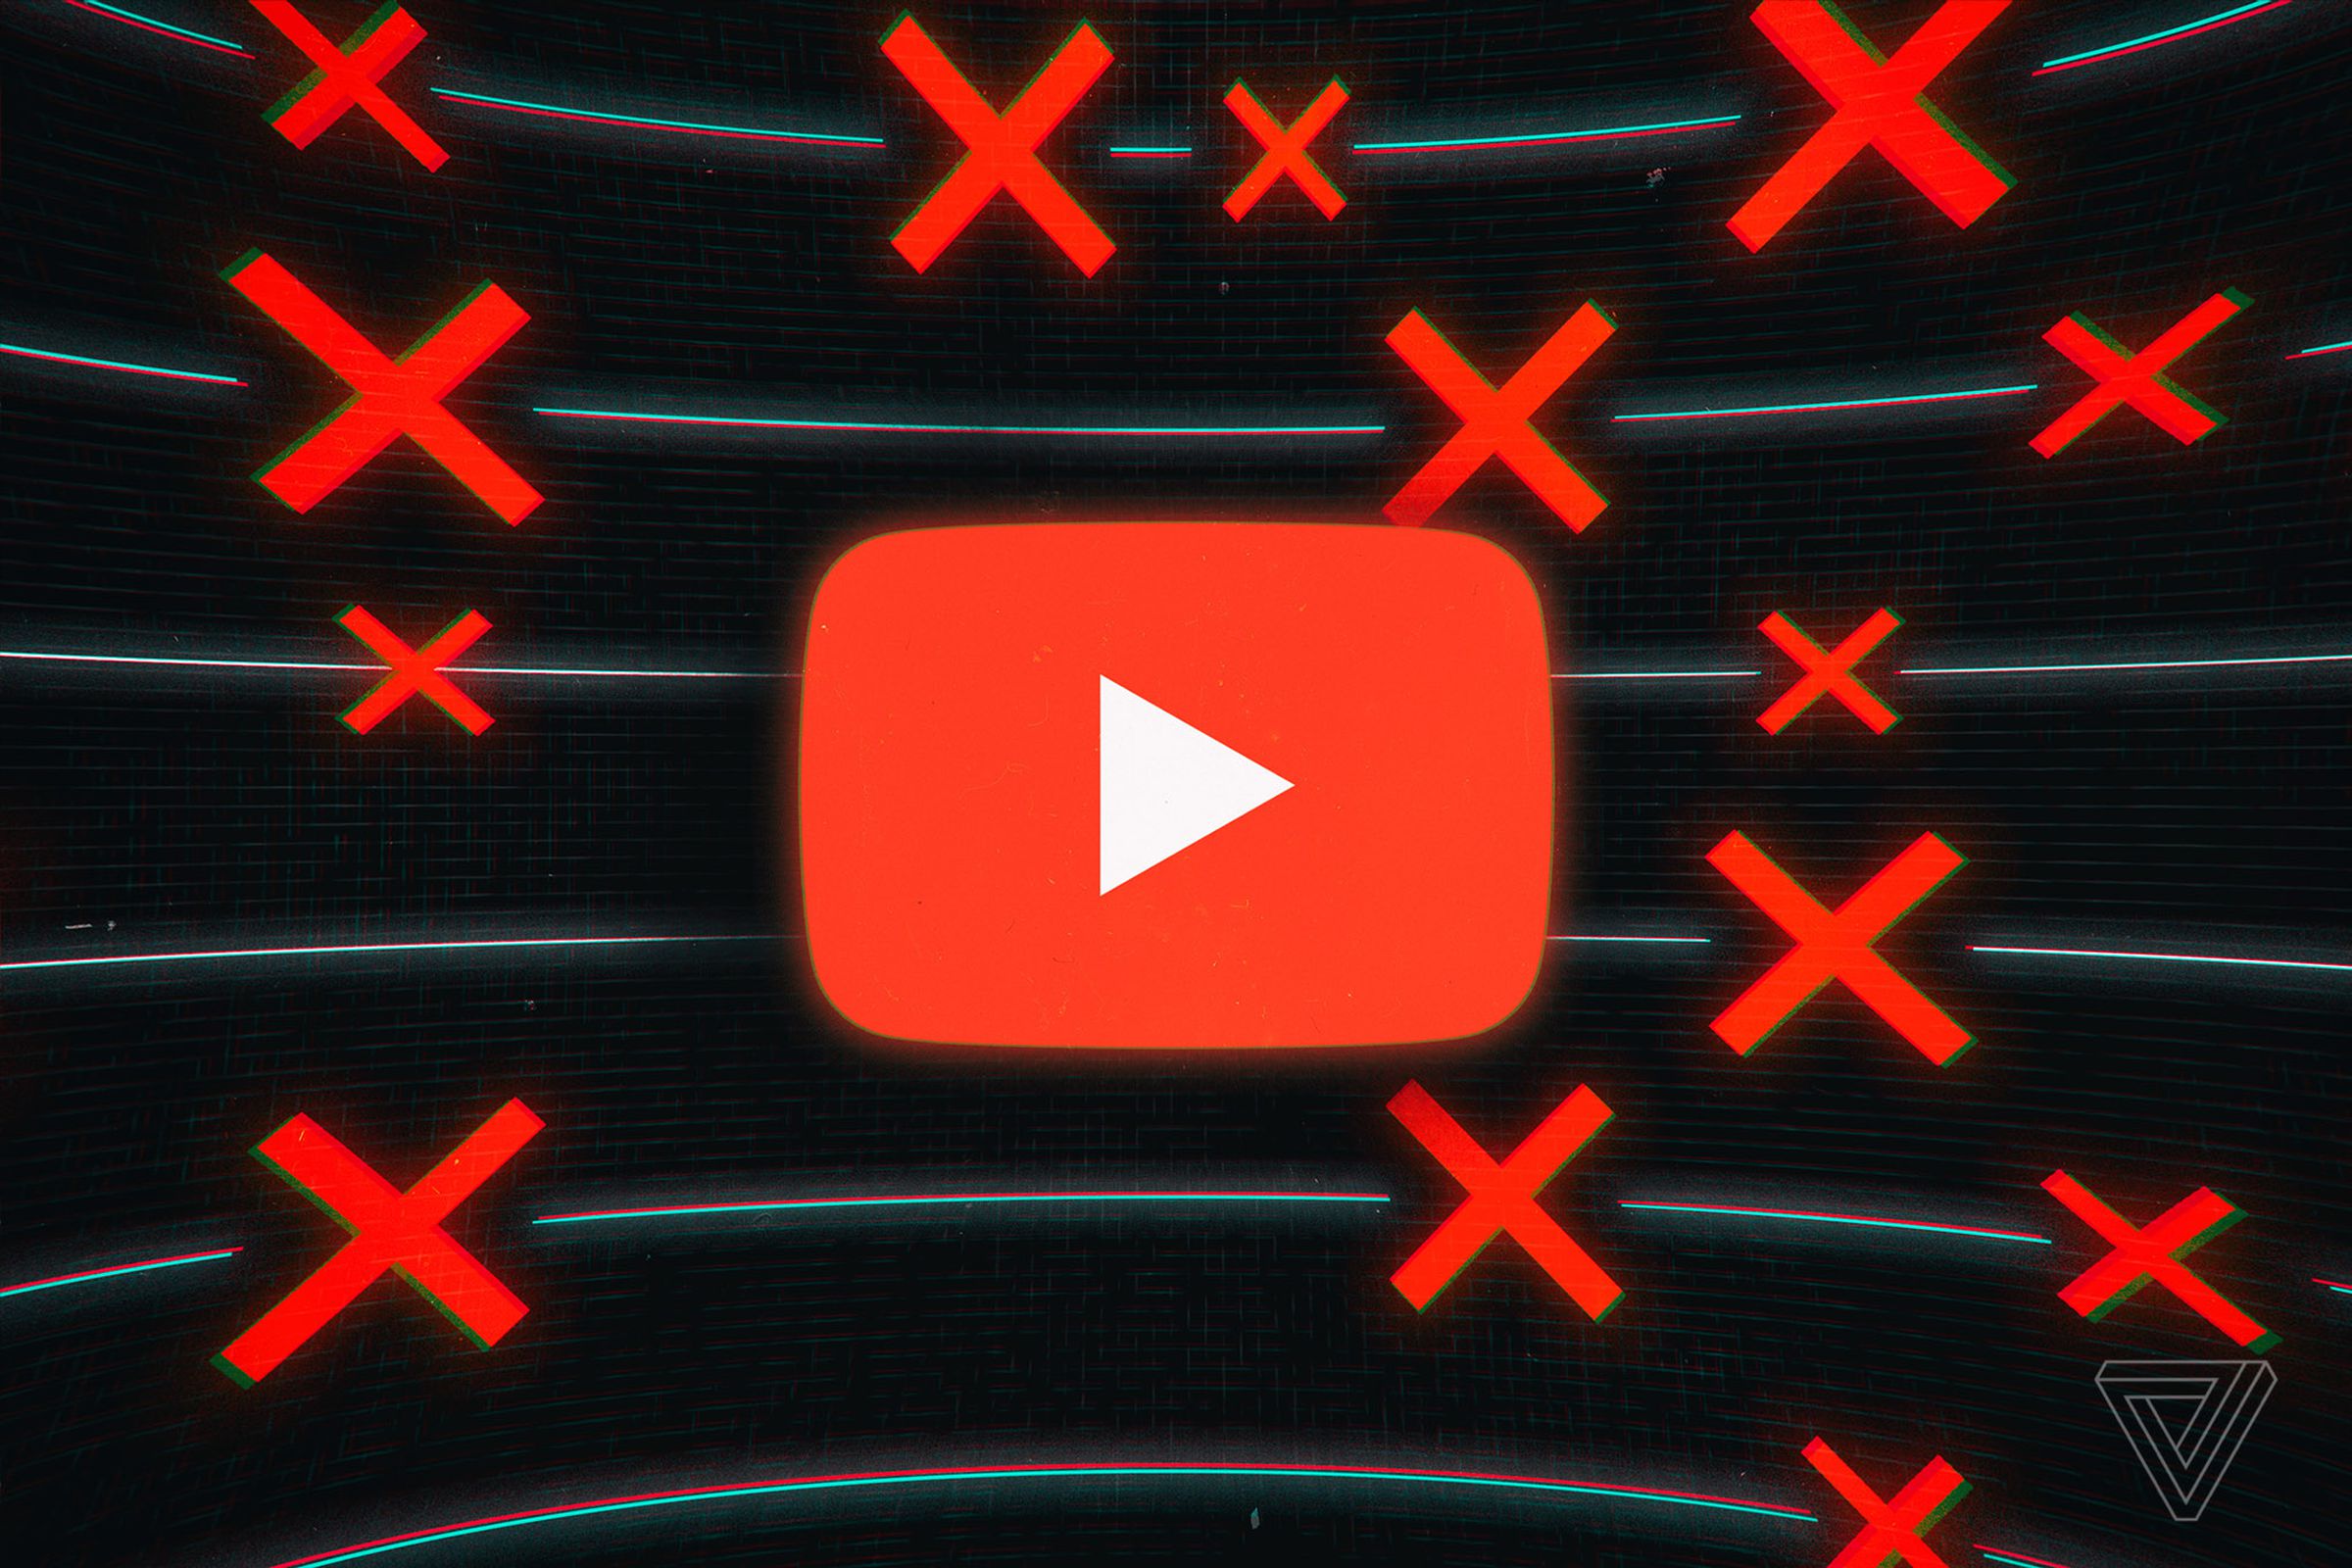 The YouTube logo against a black background with red X marks.